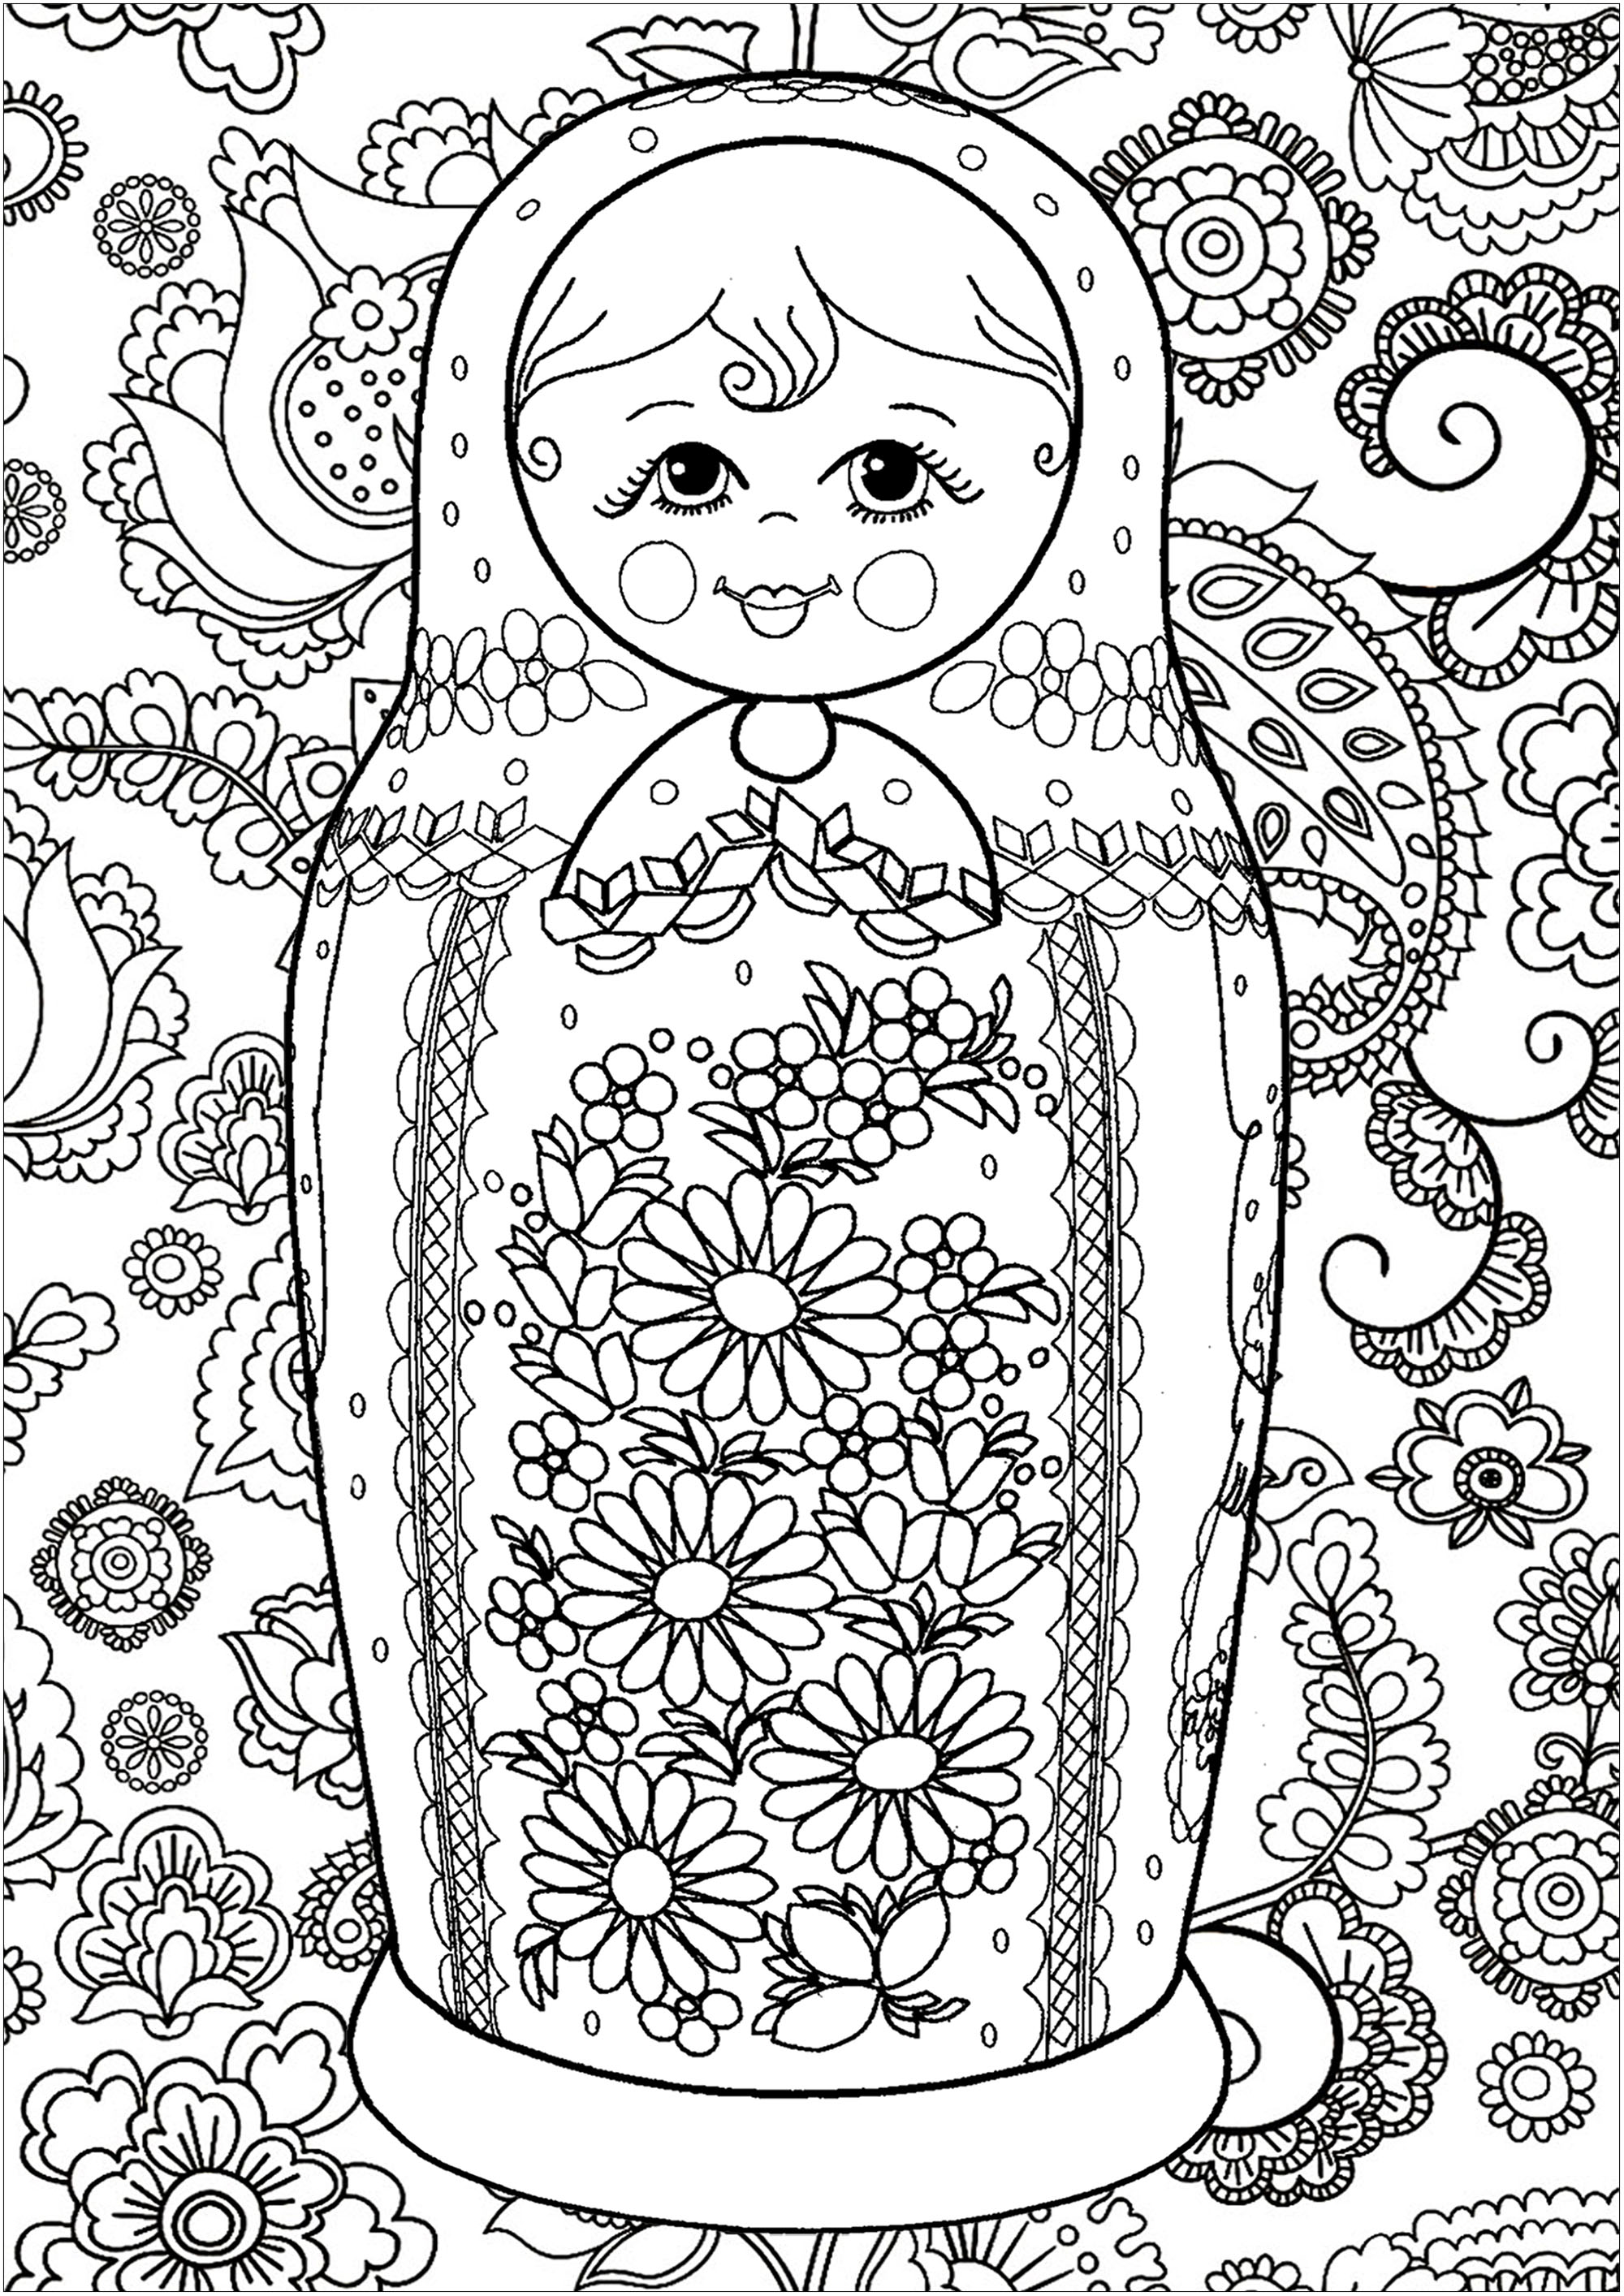 download-91-russian-doll-template-to-download-and-print-coloring-pages